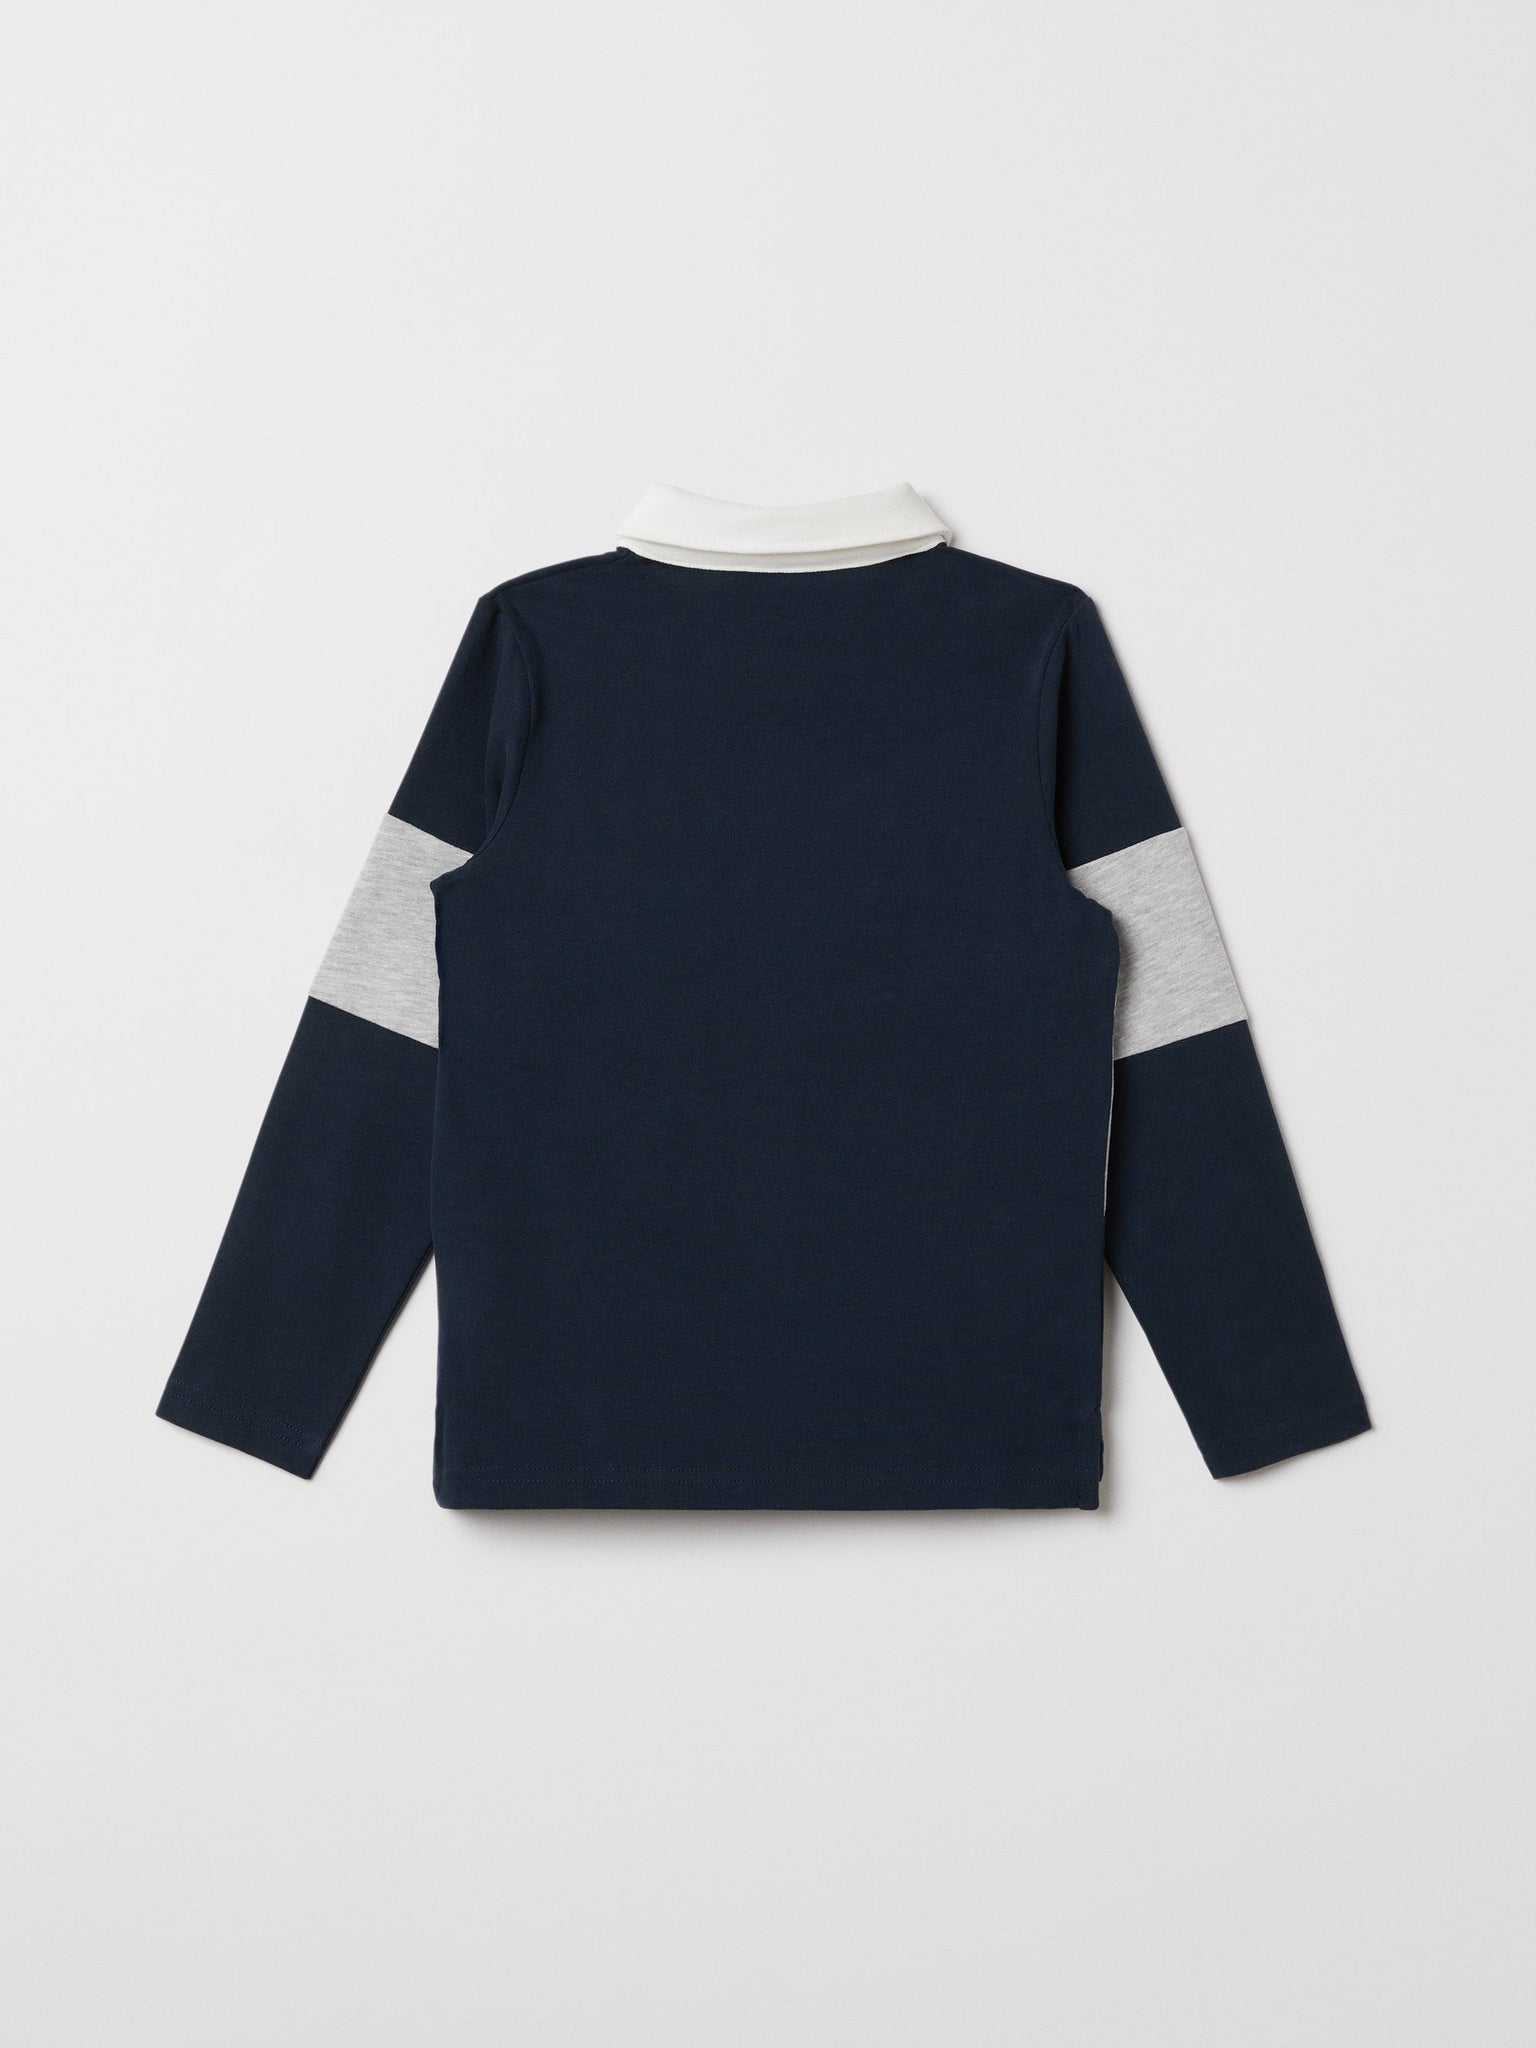 Organic Cotton Kids Rugby Shirt from the Polarn O. Pyret kidswear collection. Clothes made using sustainably sourced materials.